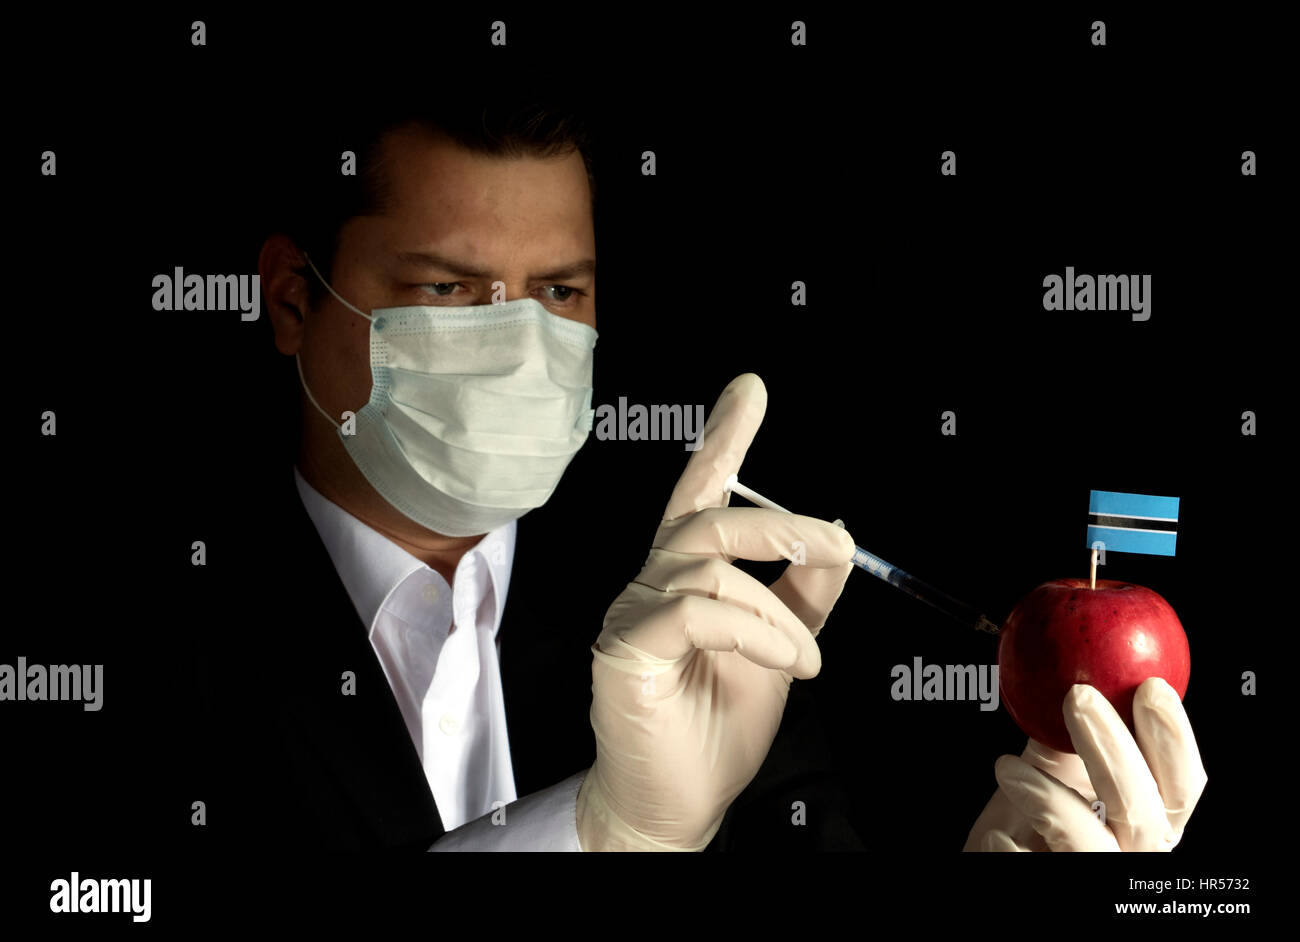 Young businessman injecting chemicals into an apple with Botswanan flag on black background Stock Photo